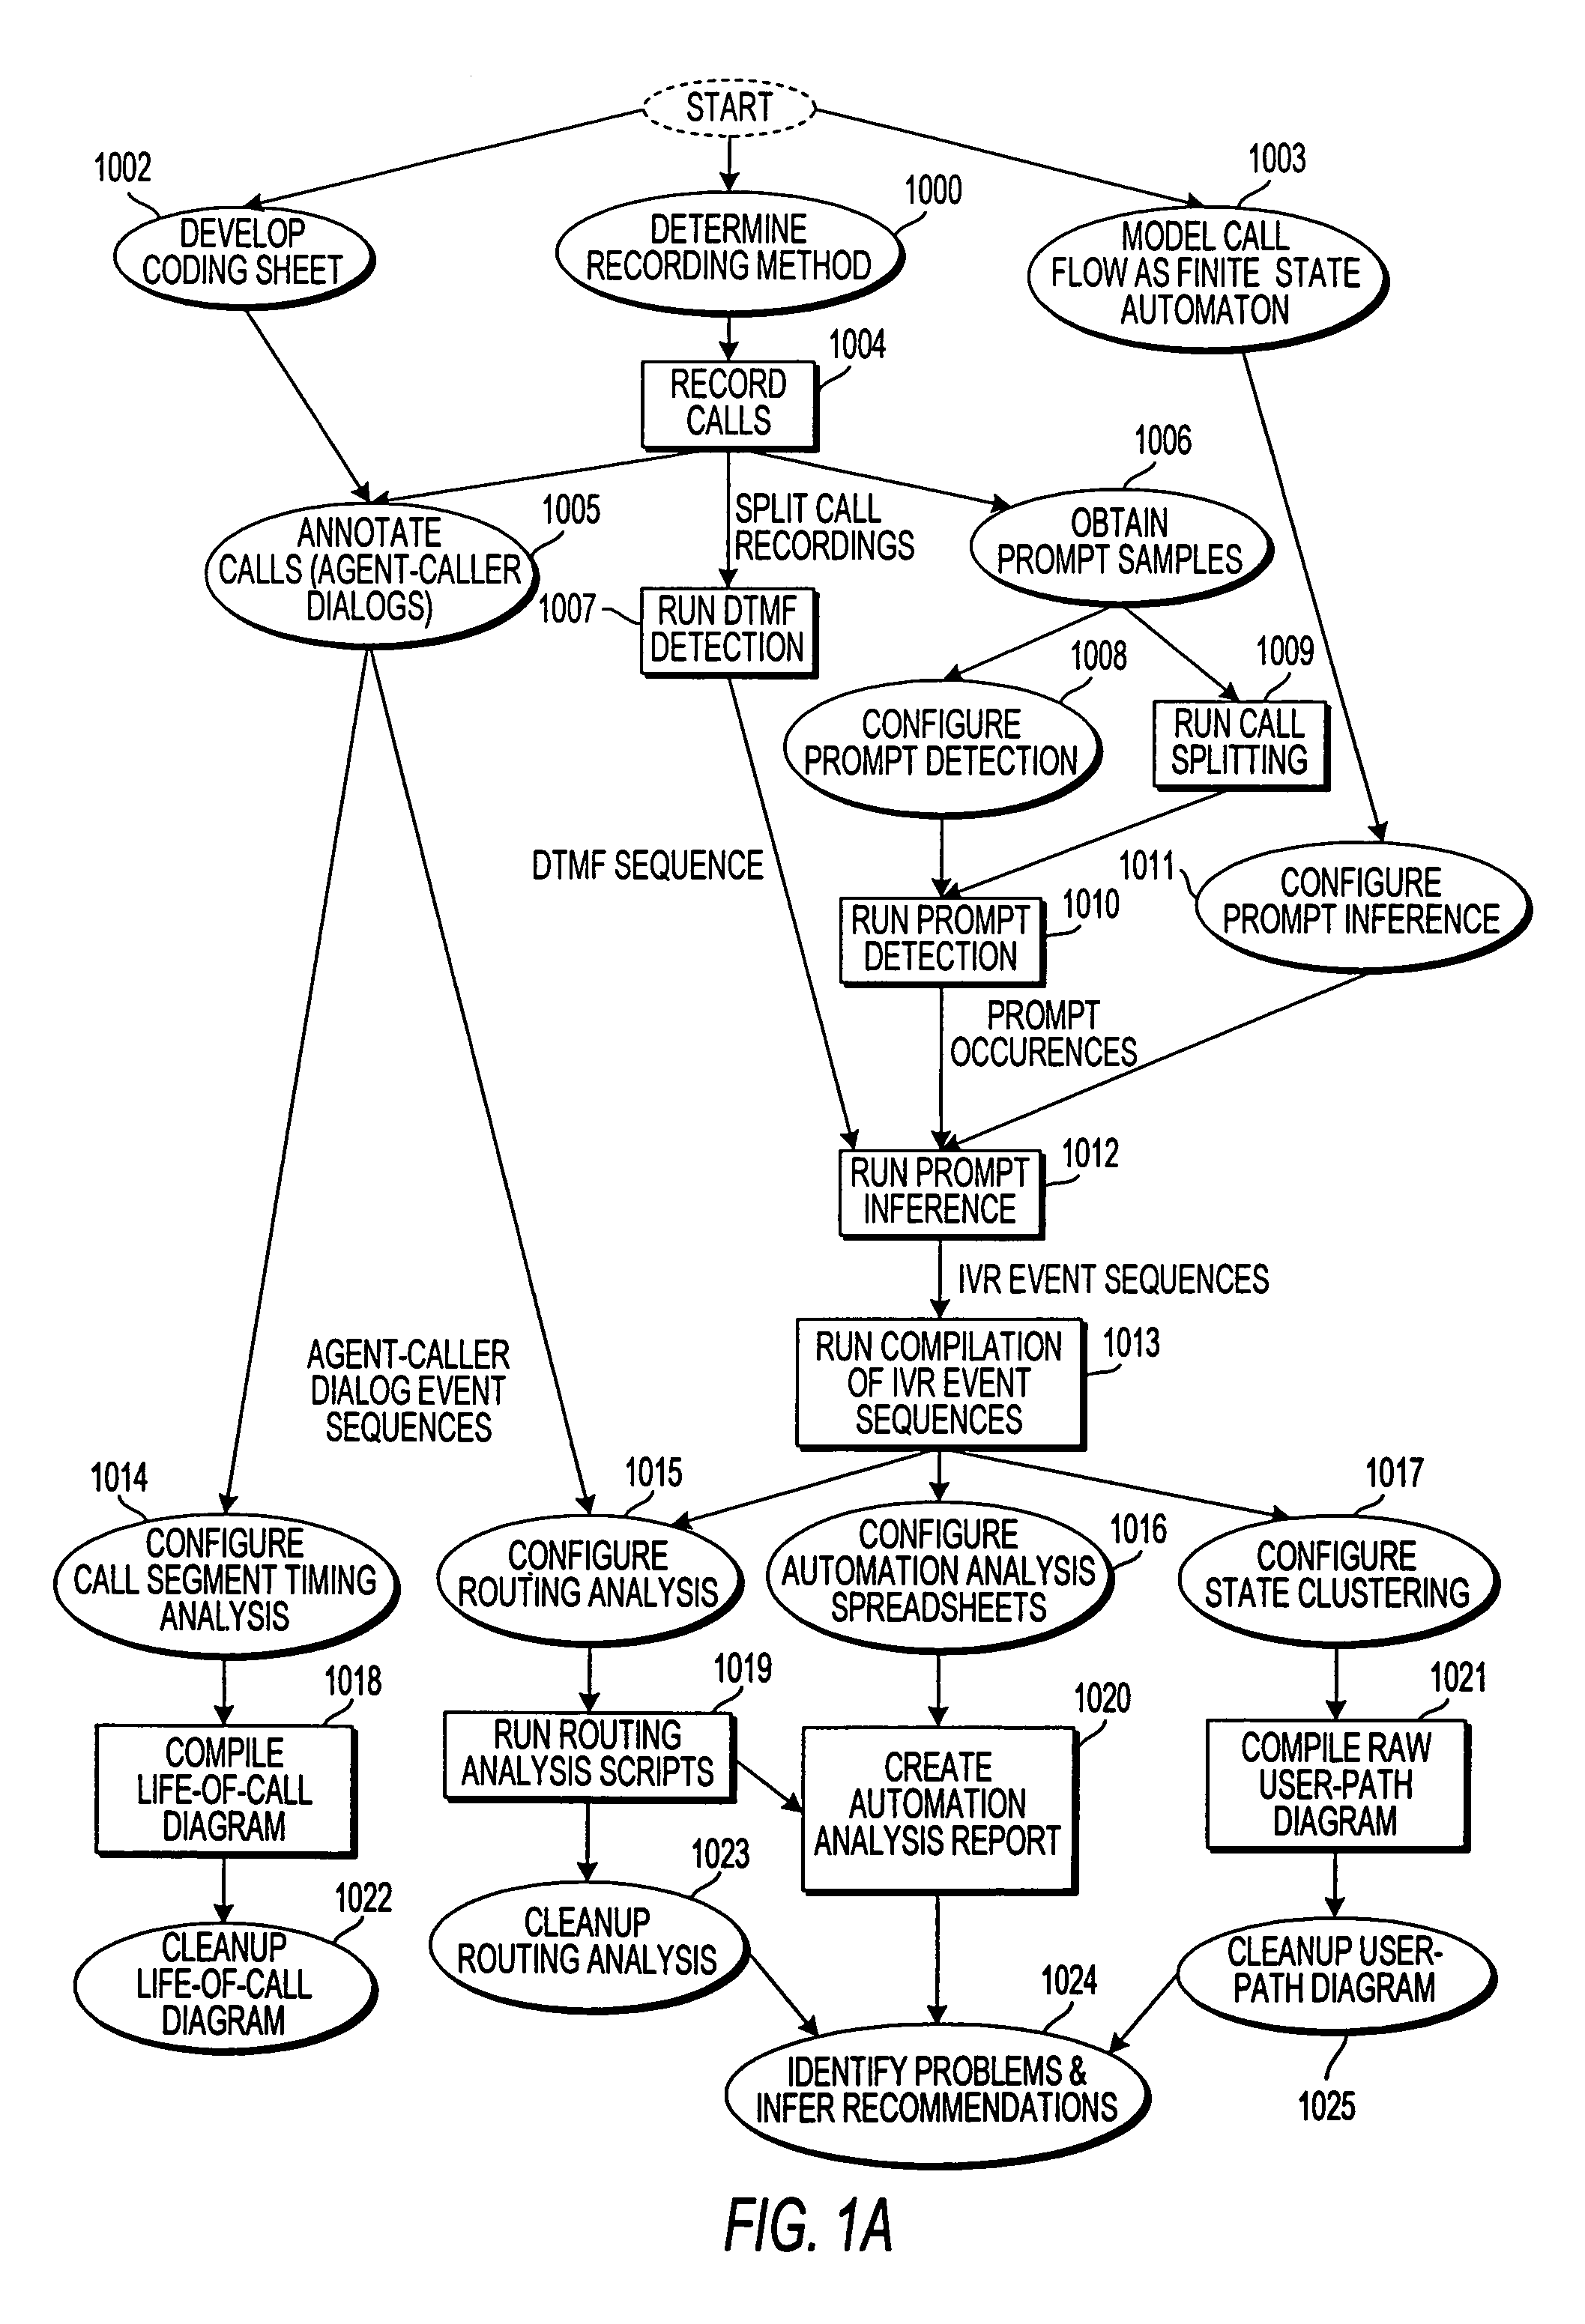 Apparatus and method for monitoring performance of an automated response system